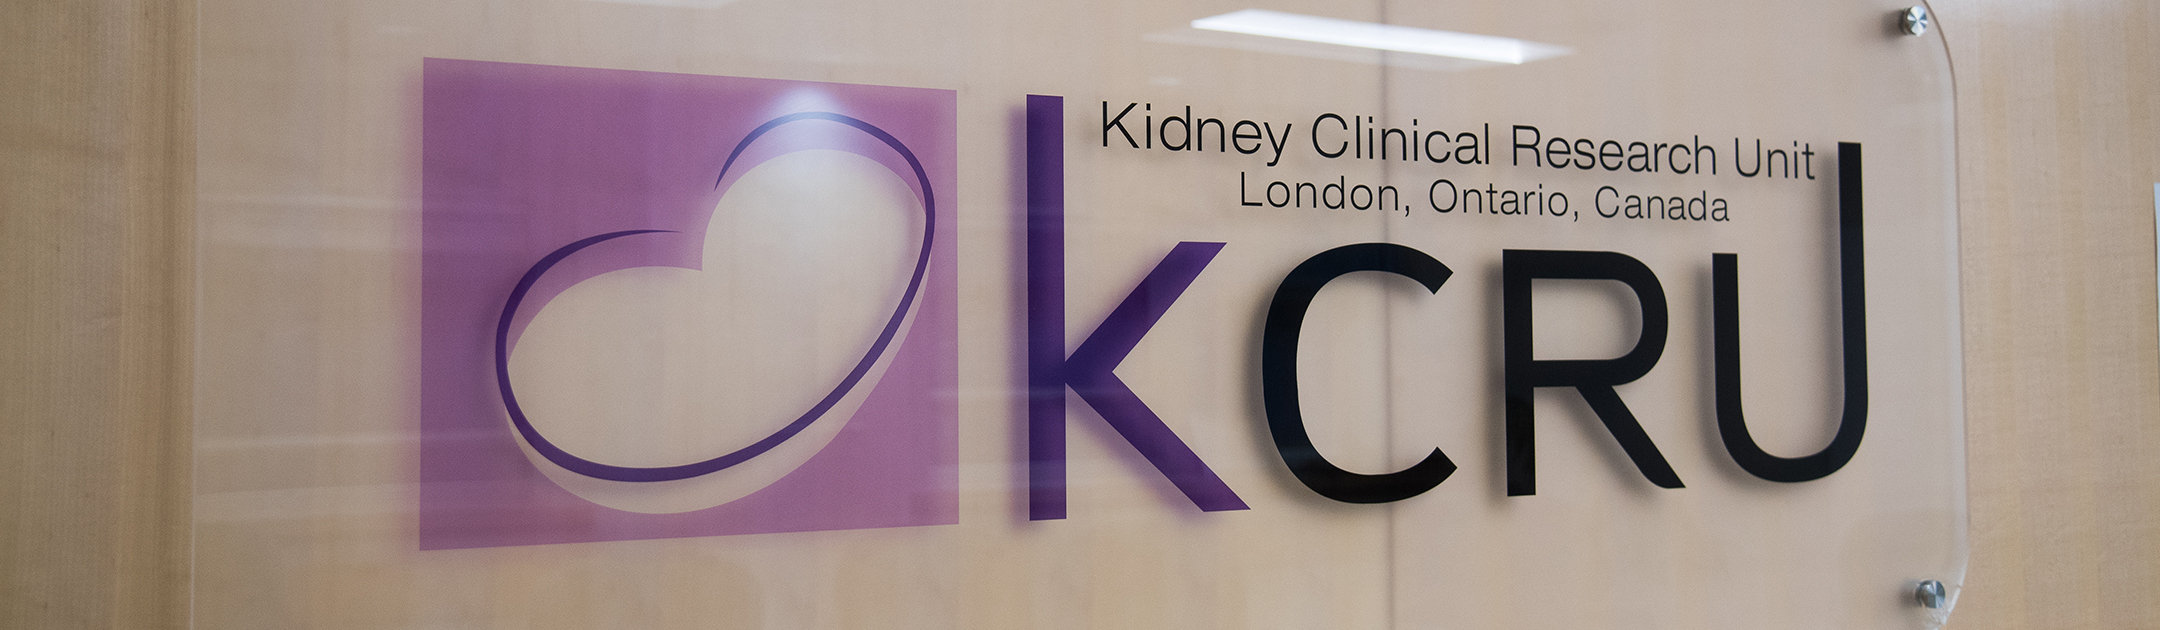 Kidney Clinical Research Unit